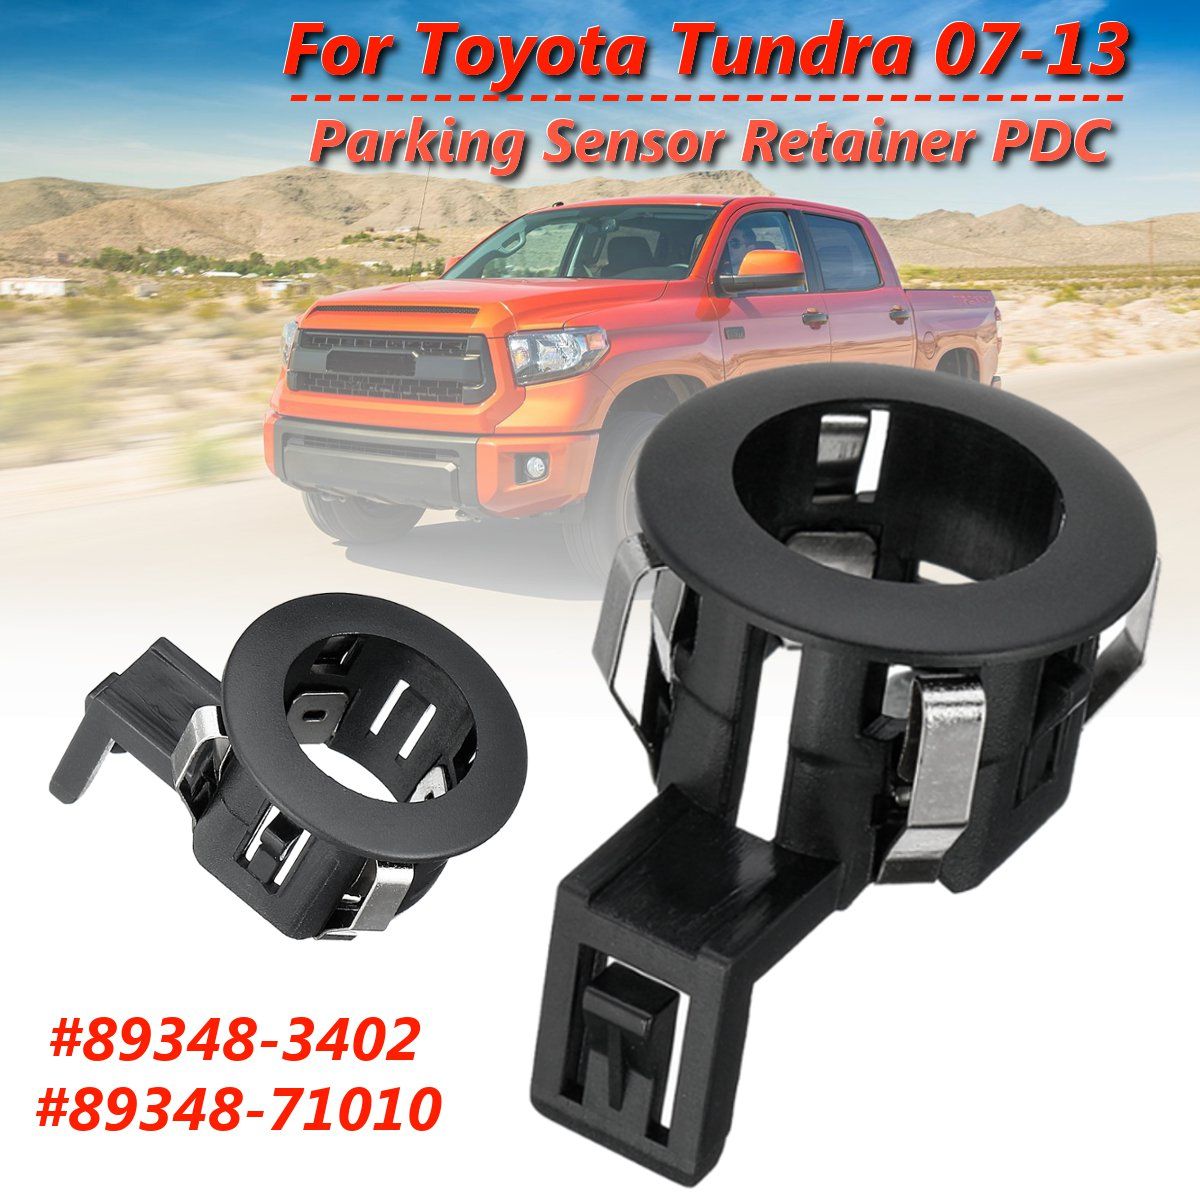 Parking-Sensor-Retainer-PDC-For-Toyota-Tundra-07-13-89348-71010-89348-34020-1584570